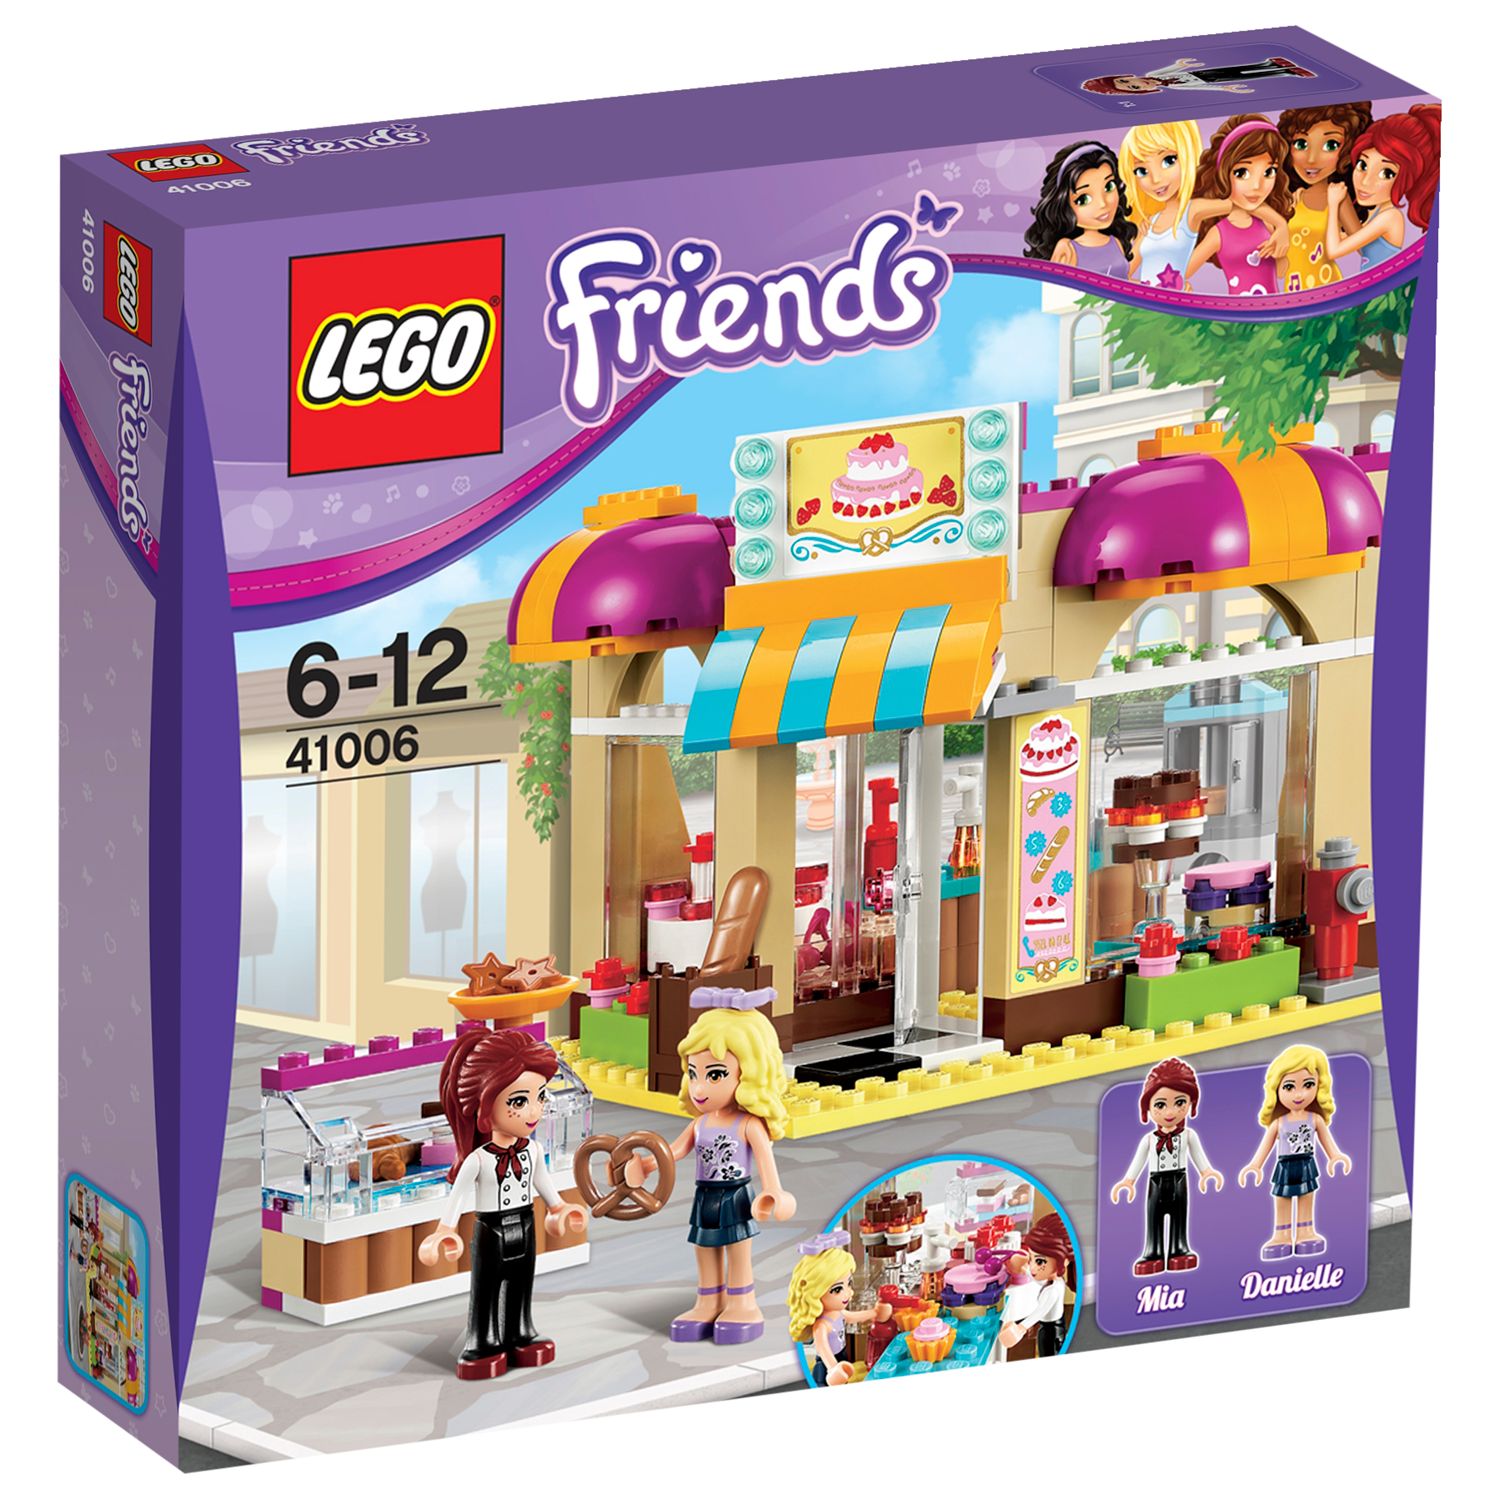 LEGO Friends Downtown Bakery at John Lewis & Partners